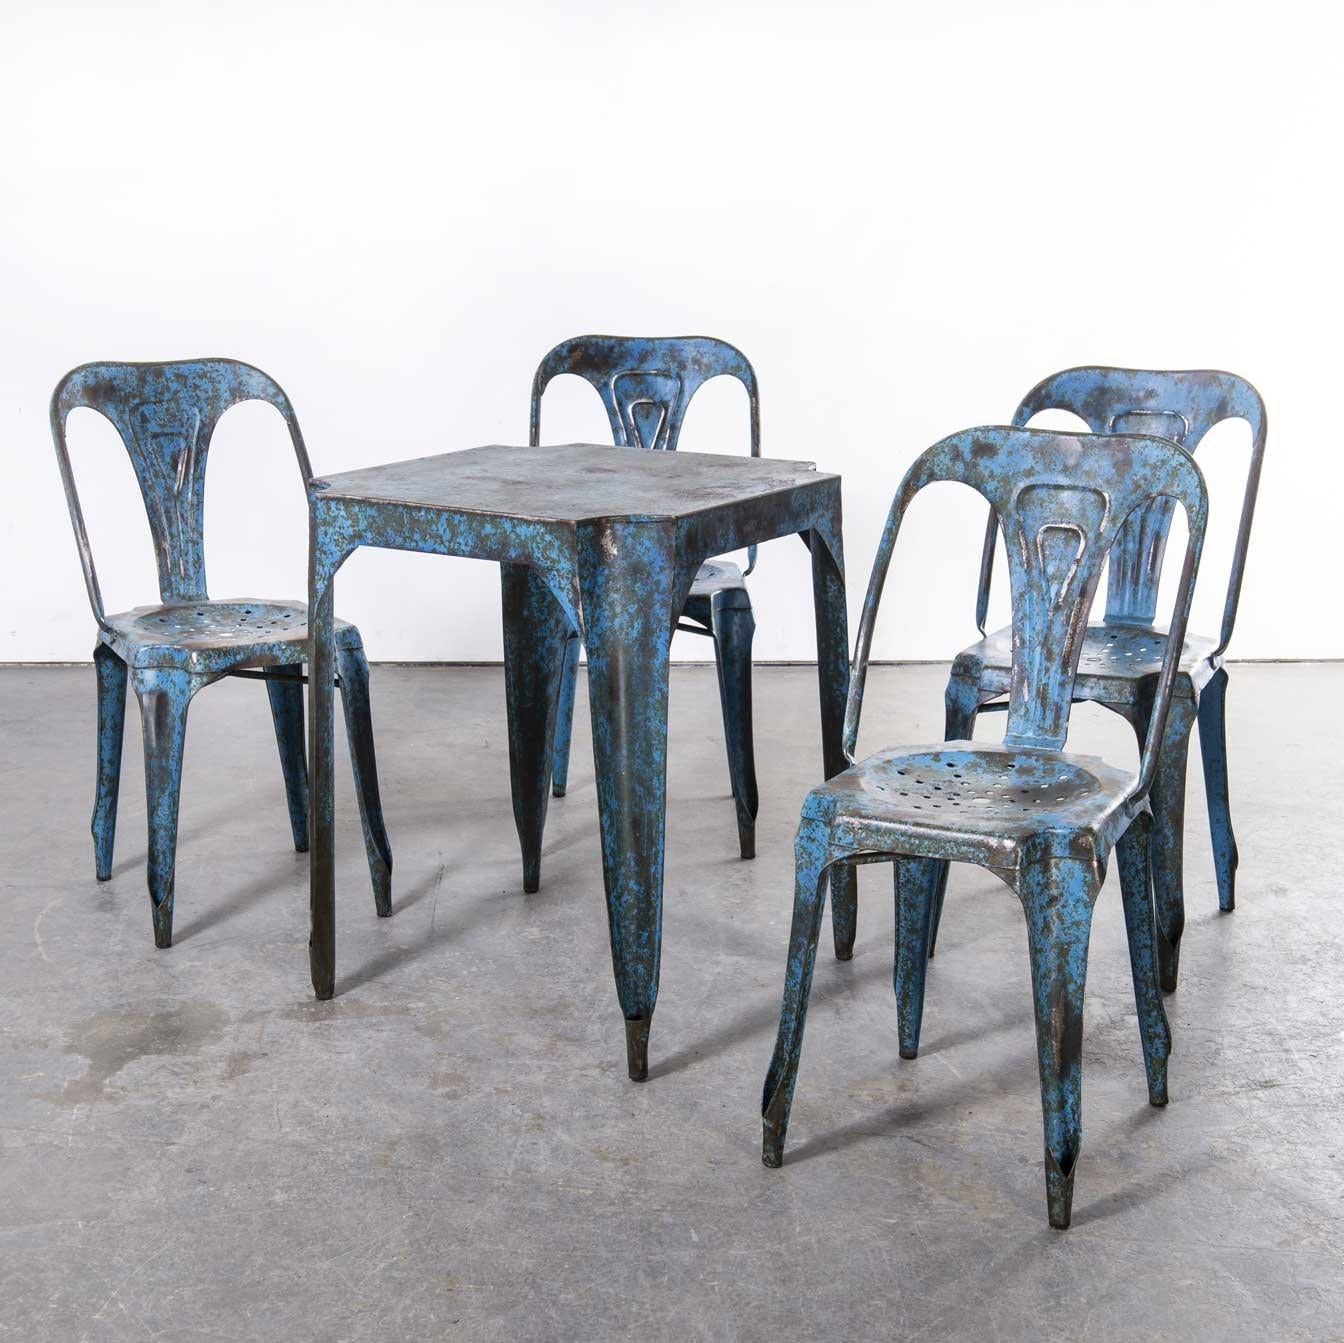 1950's Original French Multipl's Table And Chair Set - Blue For Sale 3